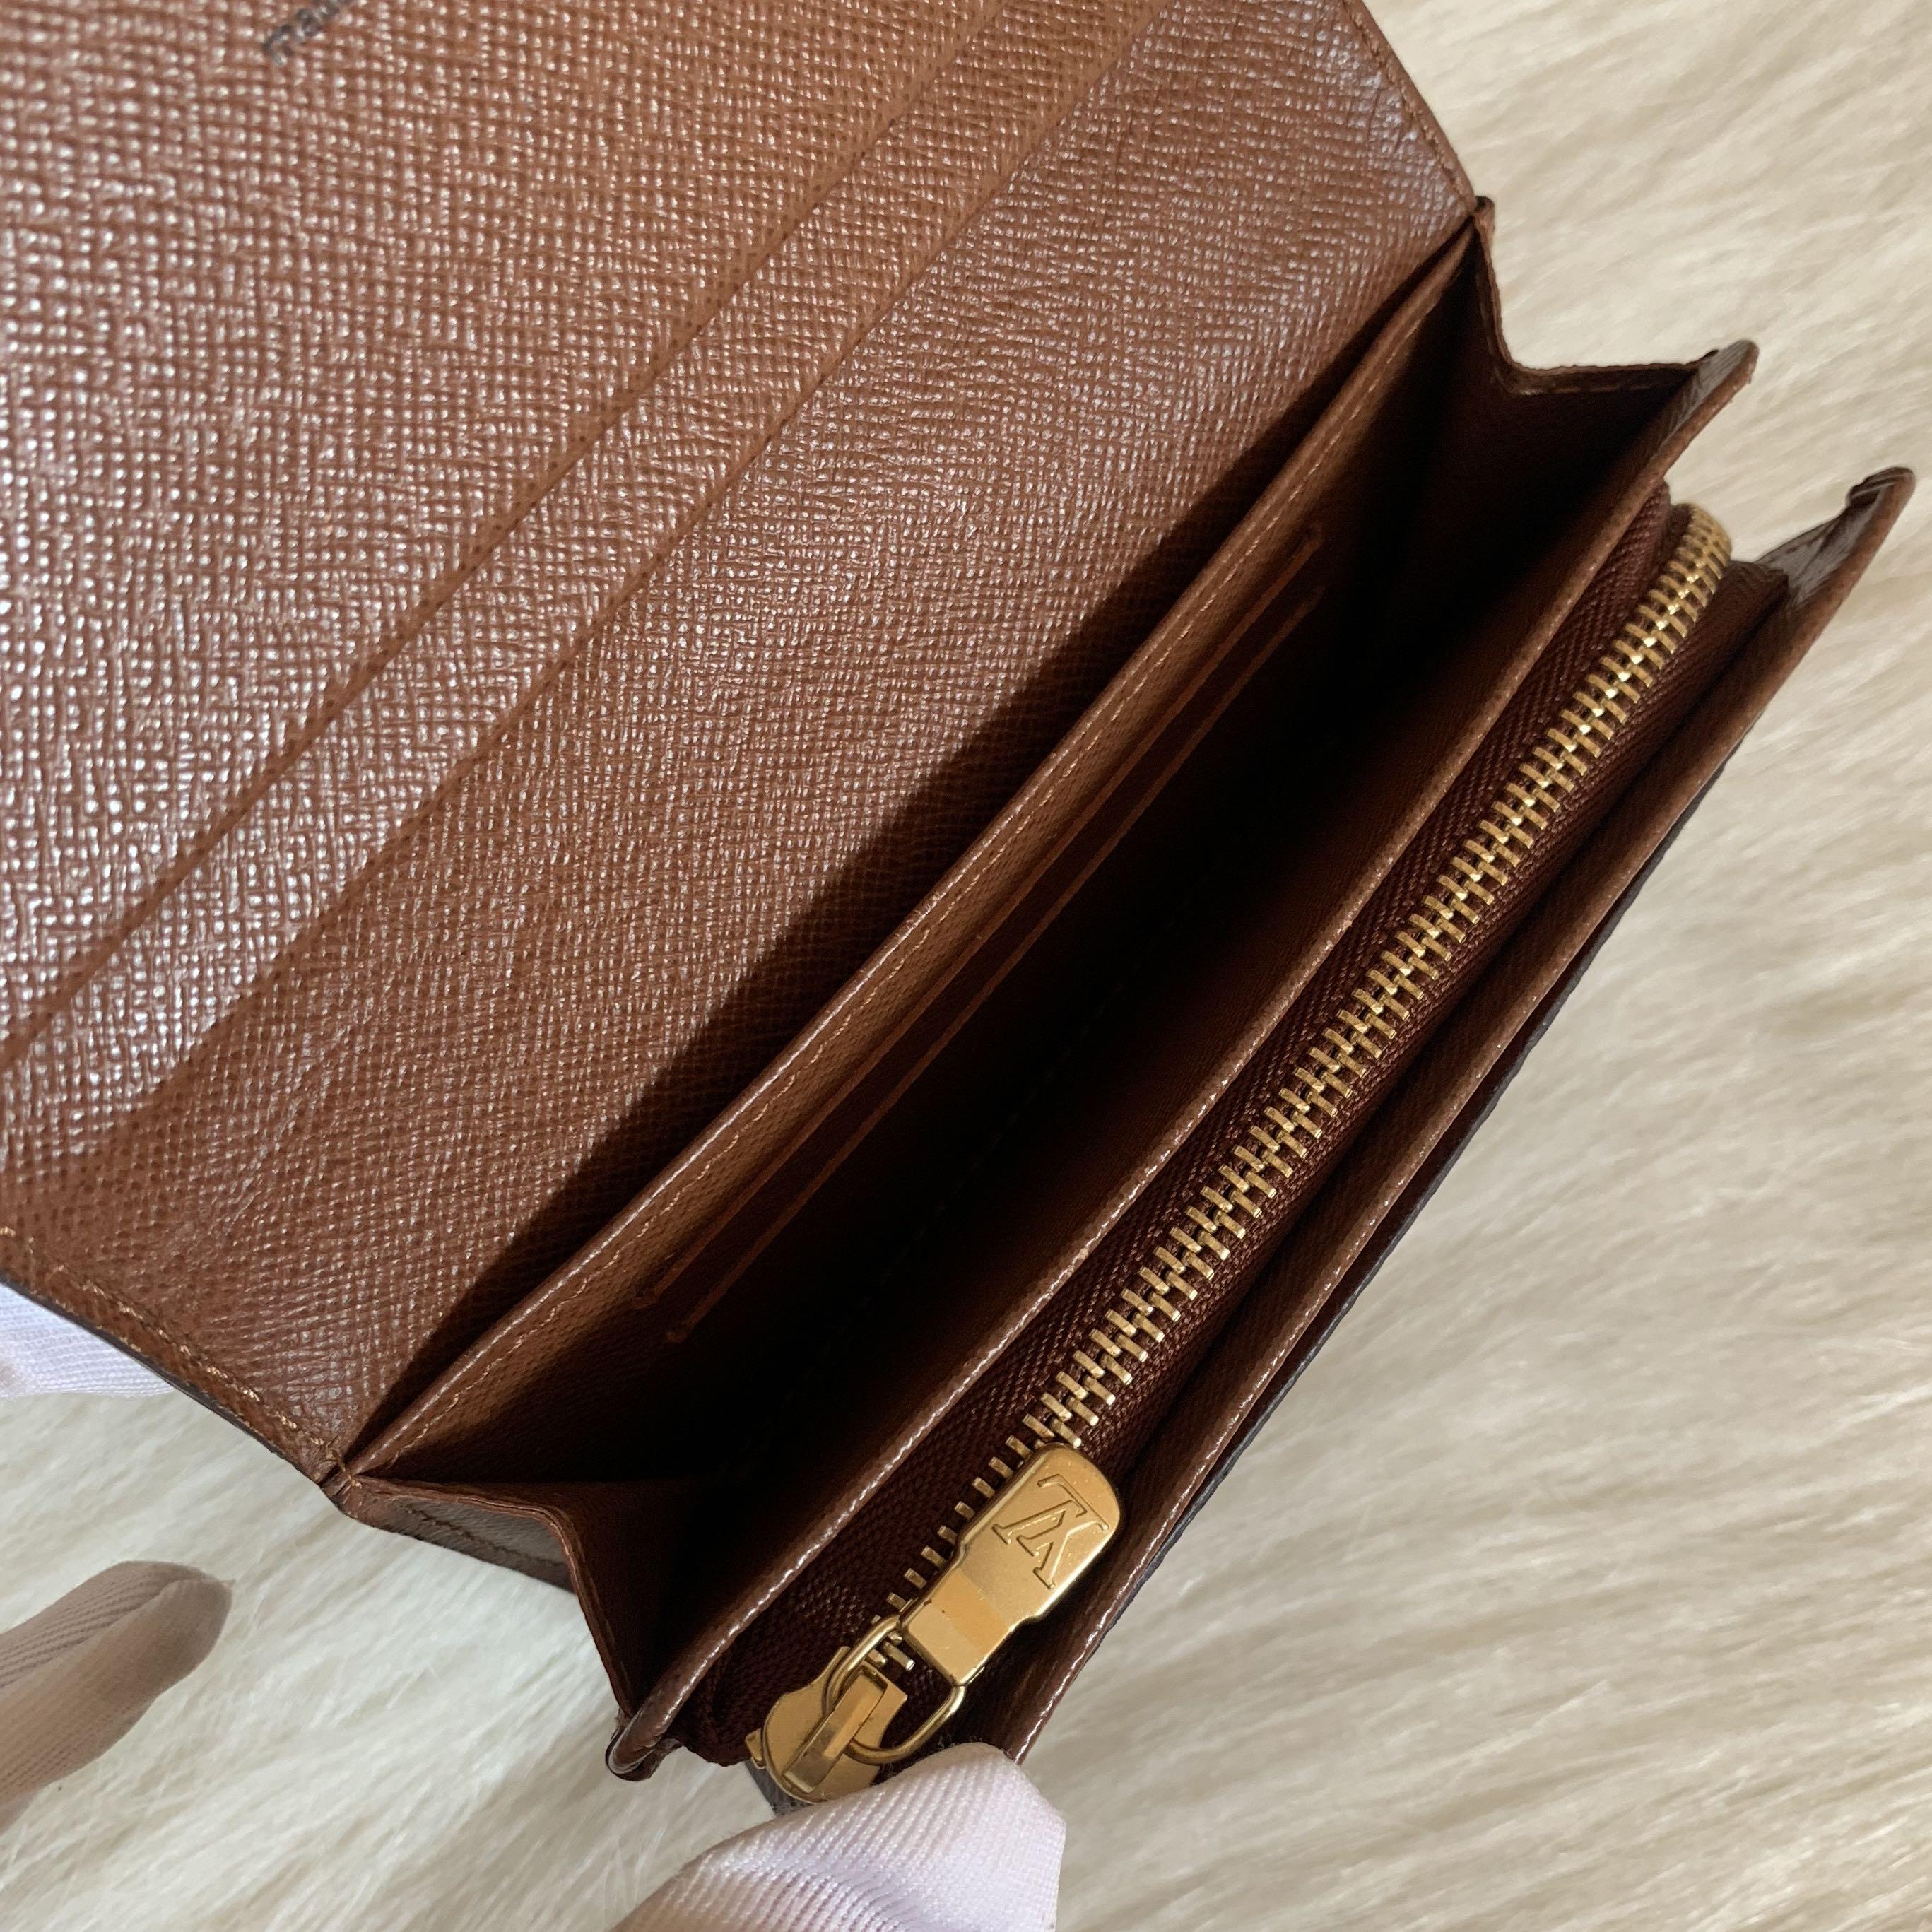 Wallet Conversion Kit for LV Monogram Wallet, Luxury, Bags & Wallets on  Carousell